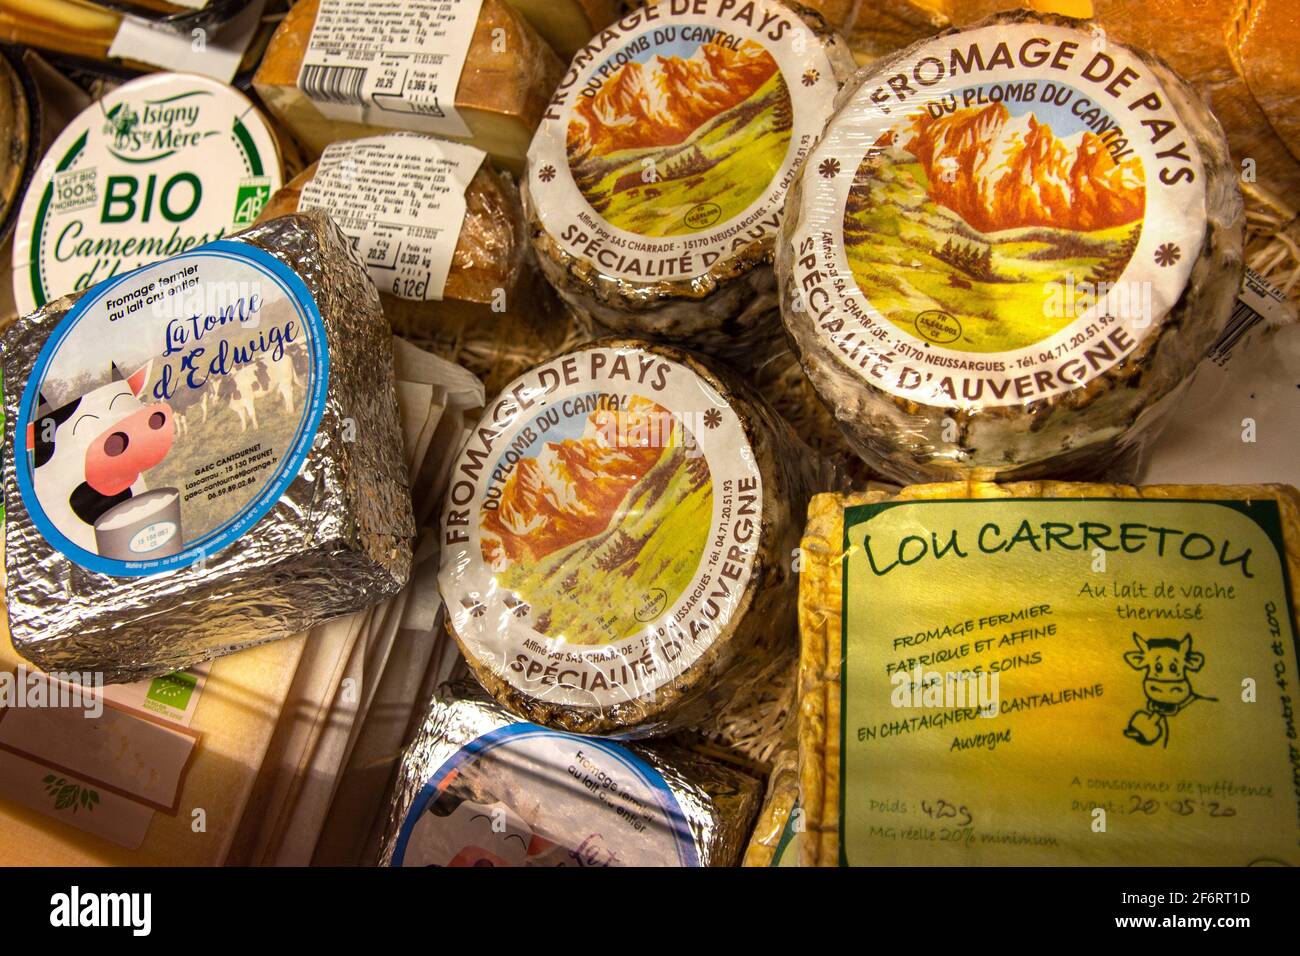 Fraance, Centre, Auvergne,  Food: France, the country with more than 400 different cheeses, Here some of central France, Auvergne region. Stock Photo